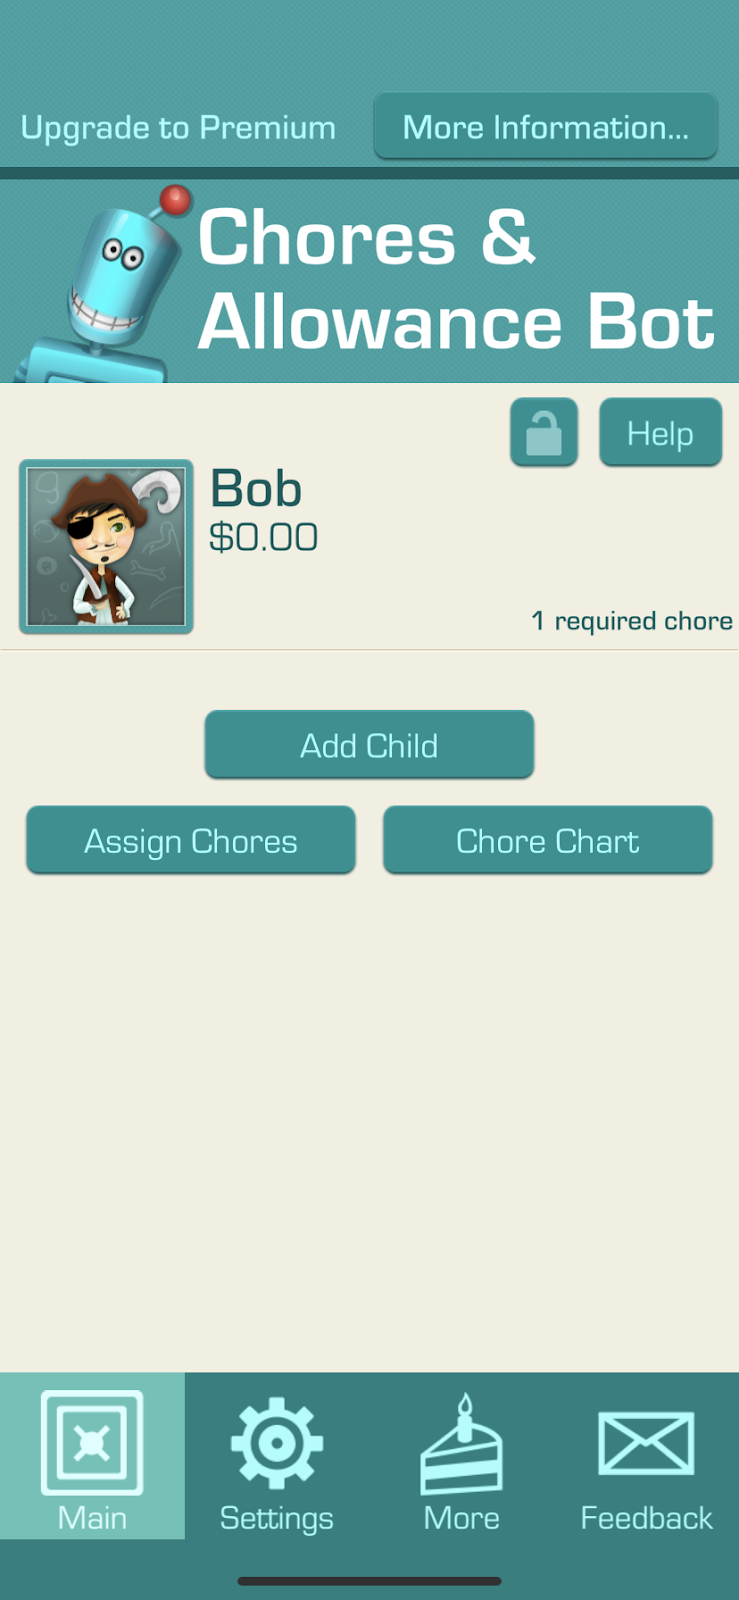 A screenshot from the chores and allowance bot app for kids.